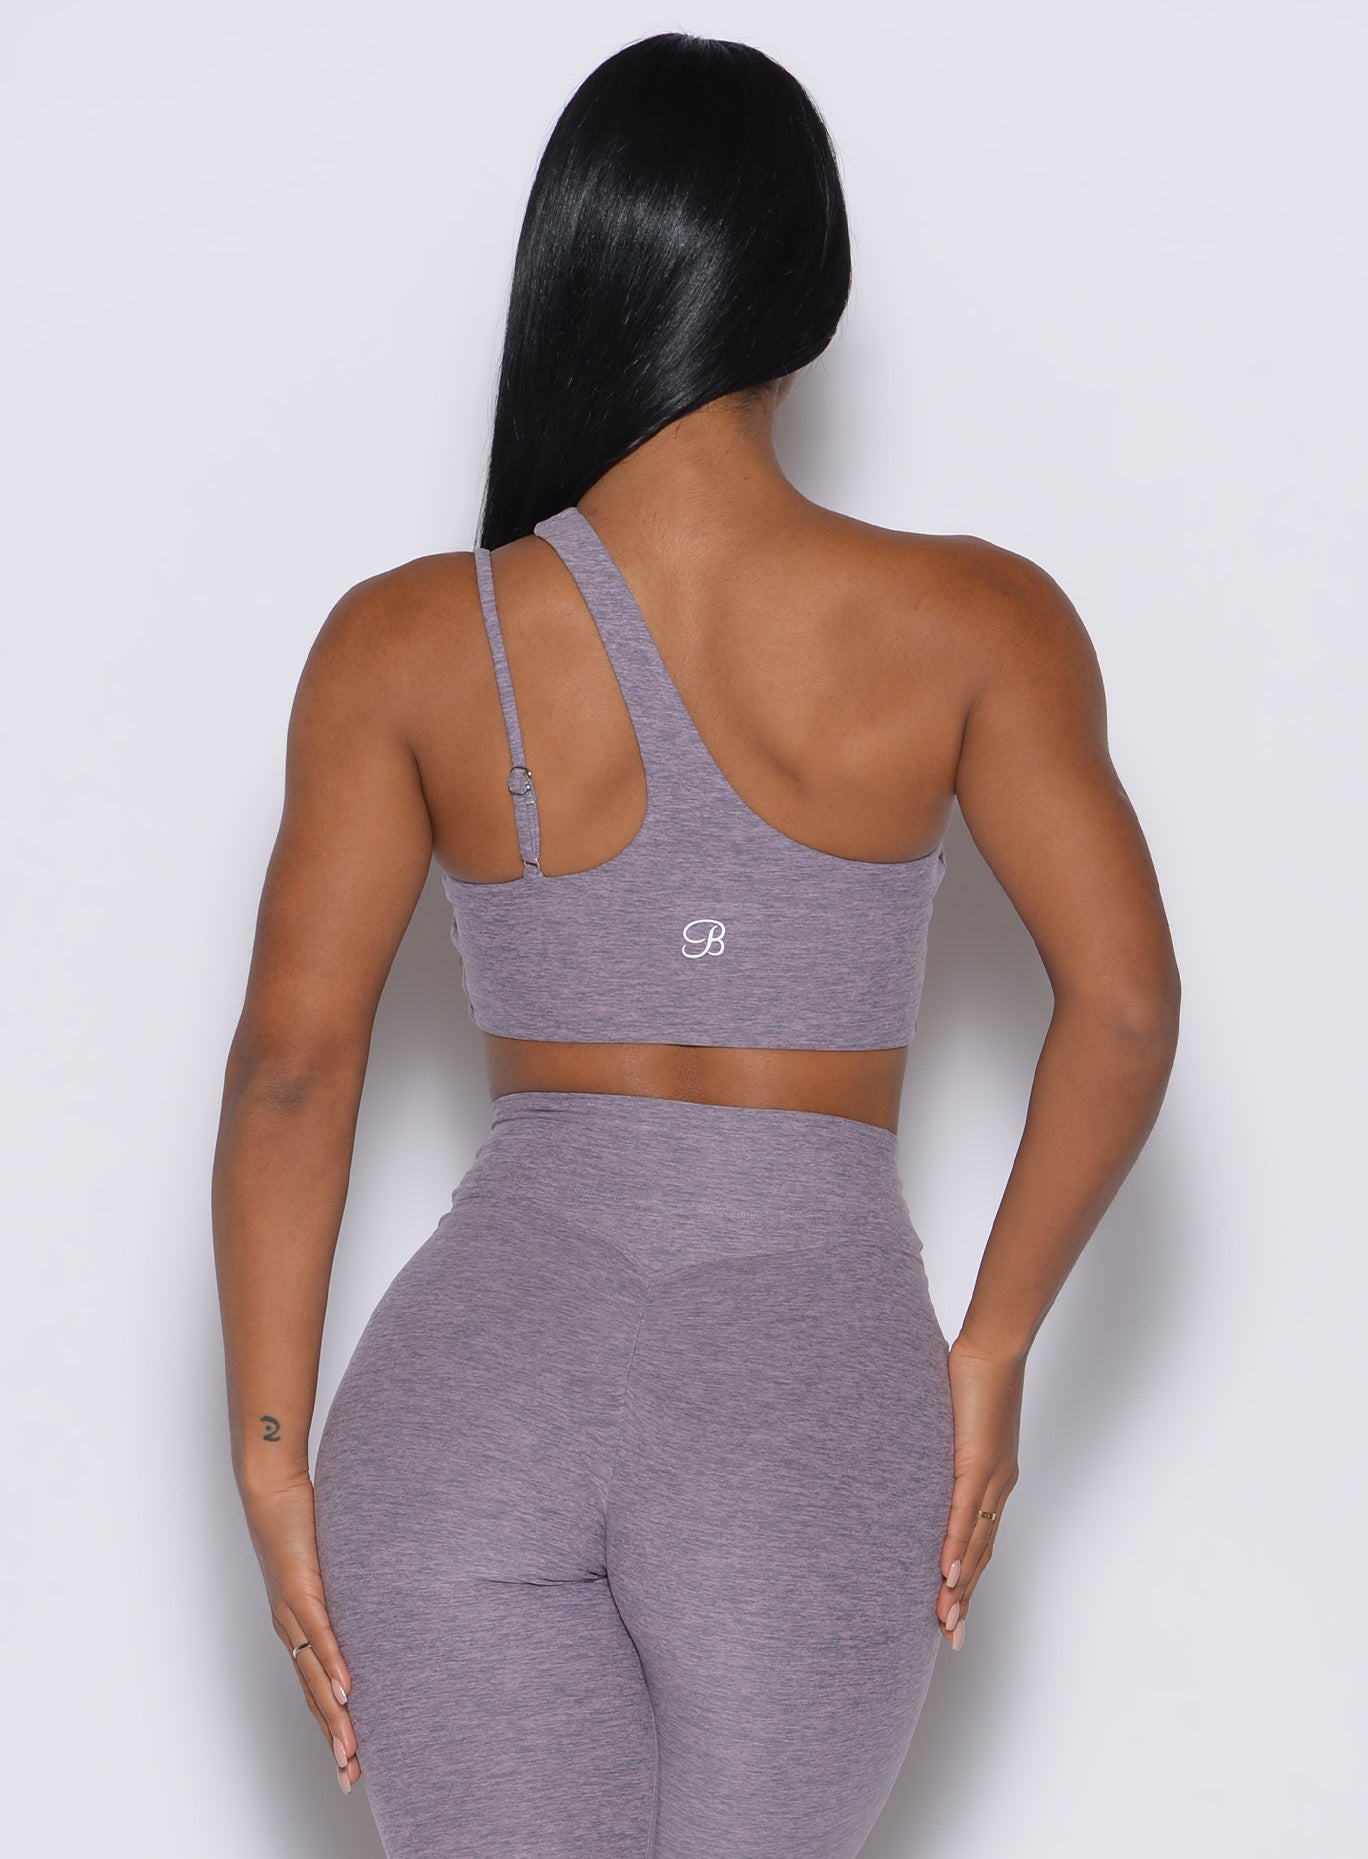 back profile view of a model wearing our lateral top in Lilac Grey along with a matching leggings